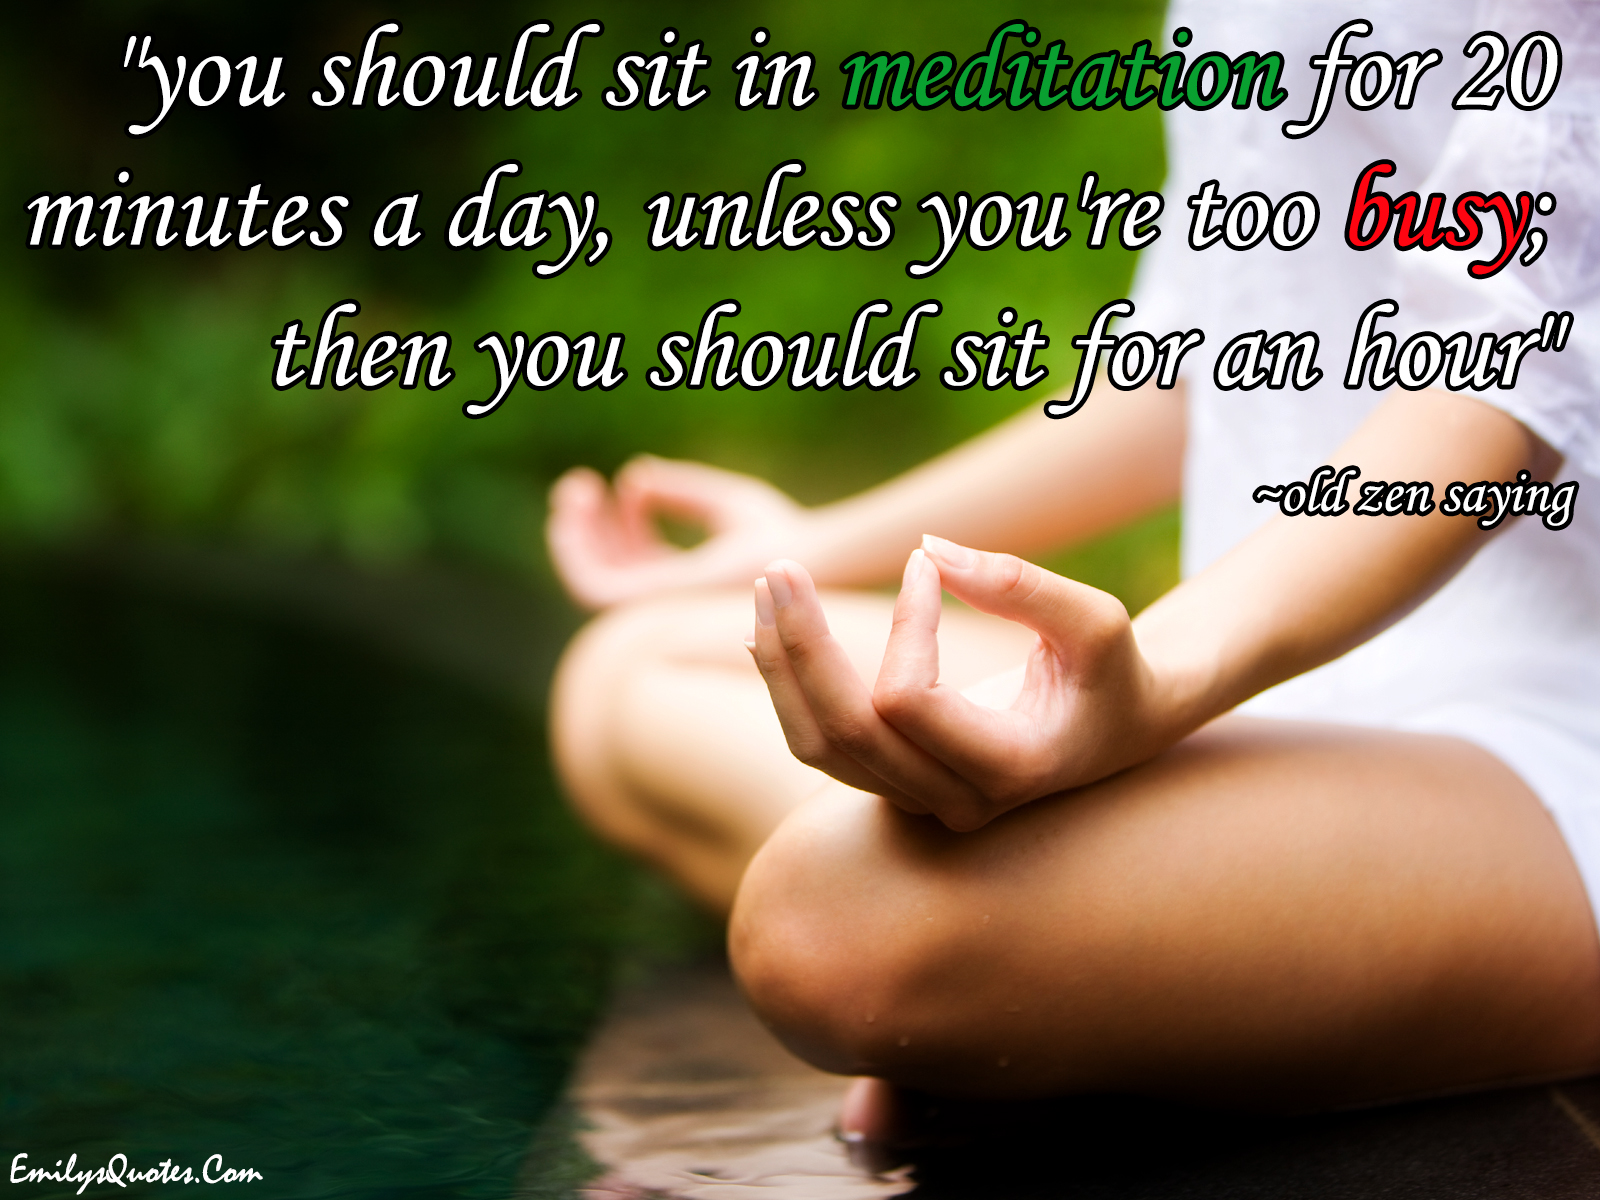 You should sit in meditation for 20 minutes a day, unless you’re too busy; then you should sit for an hour